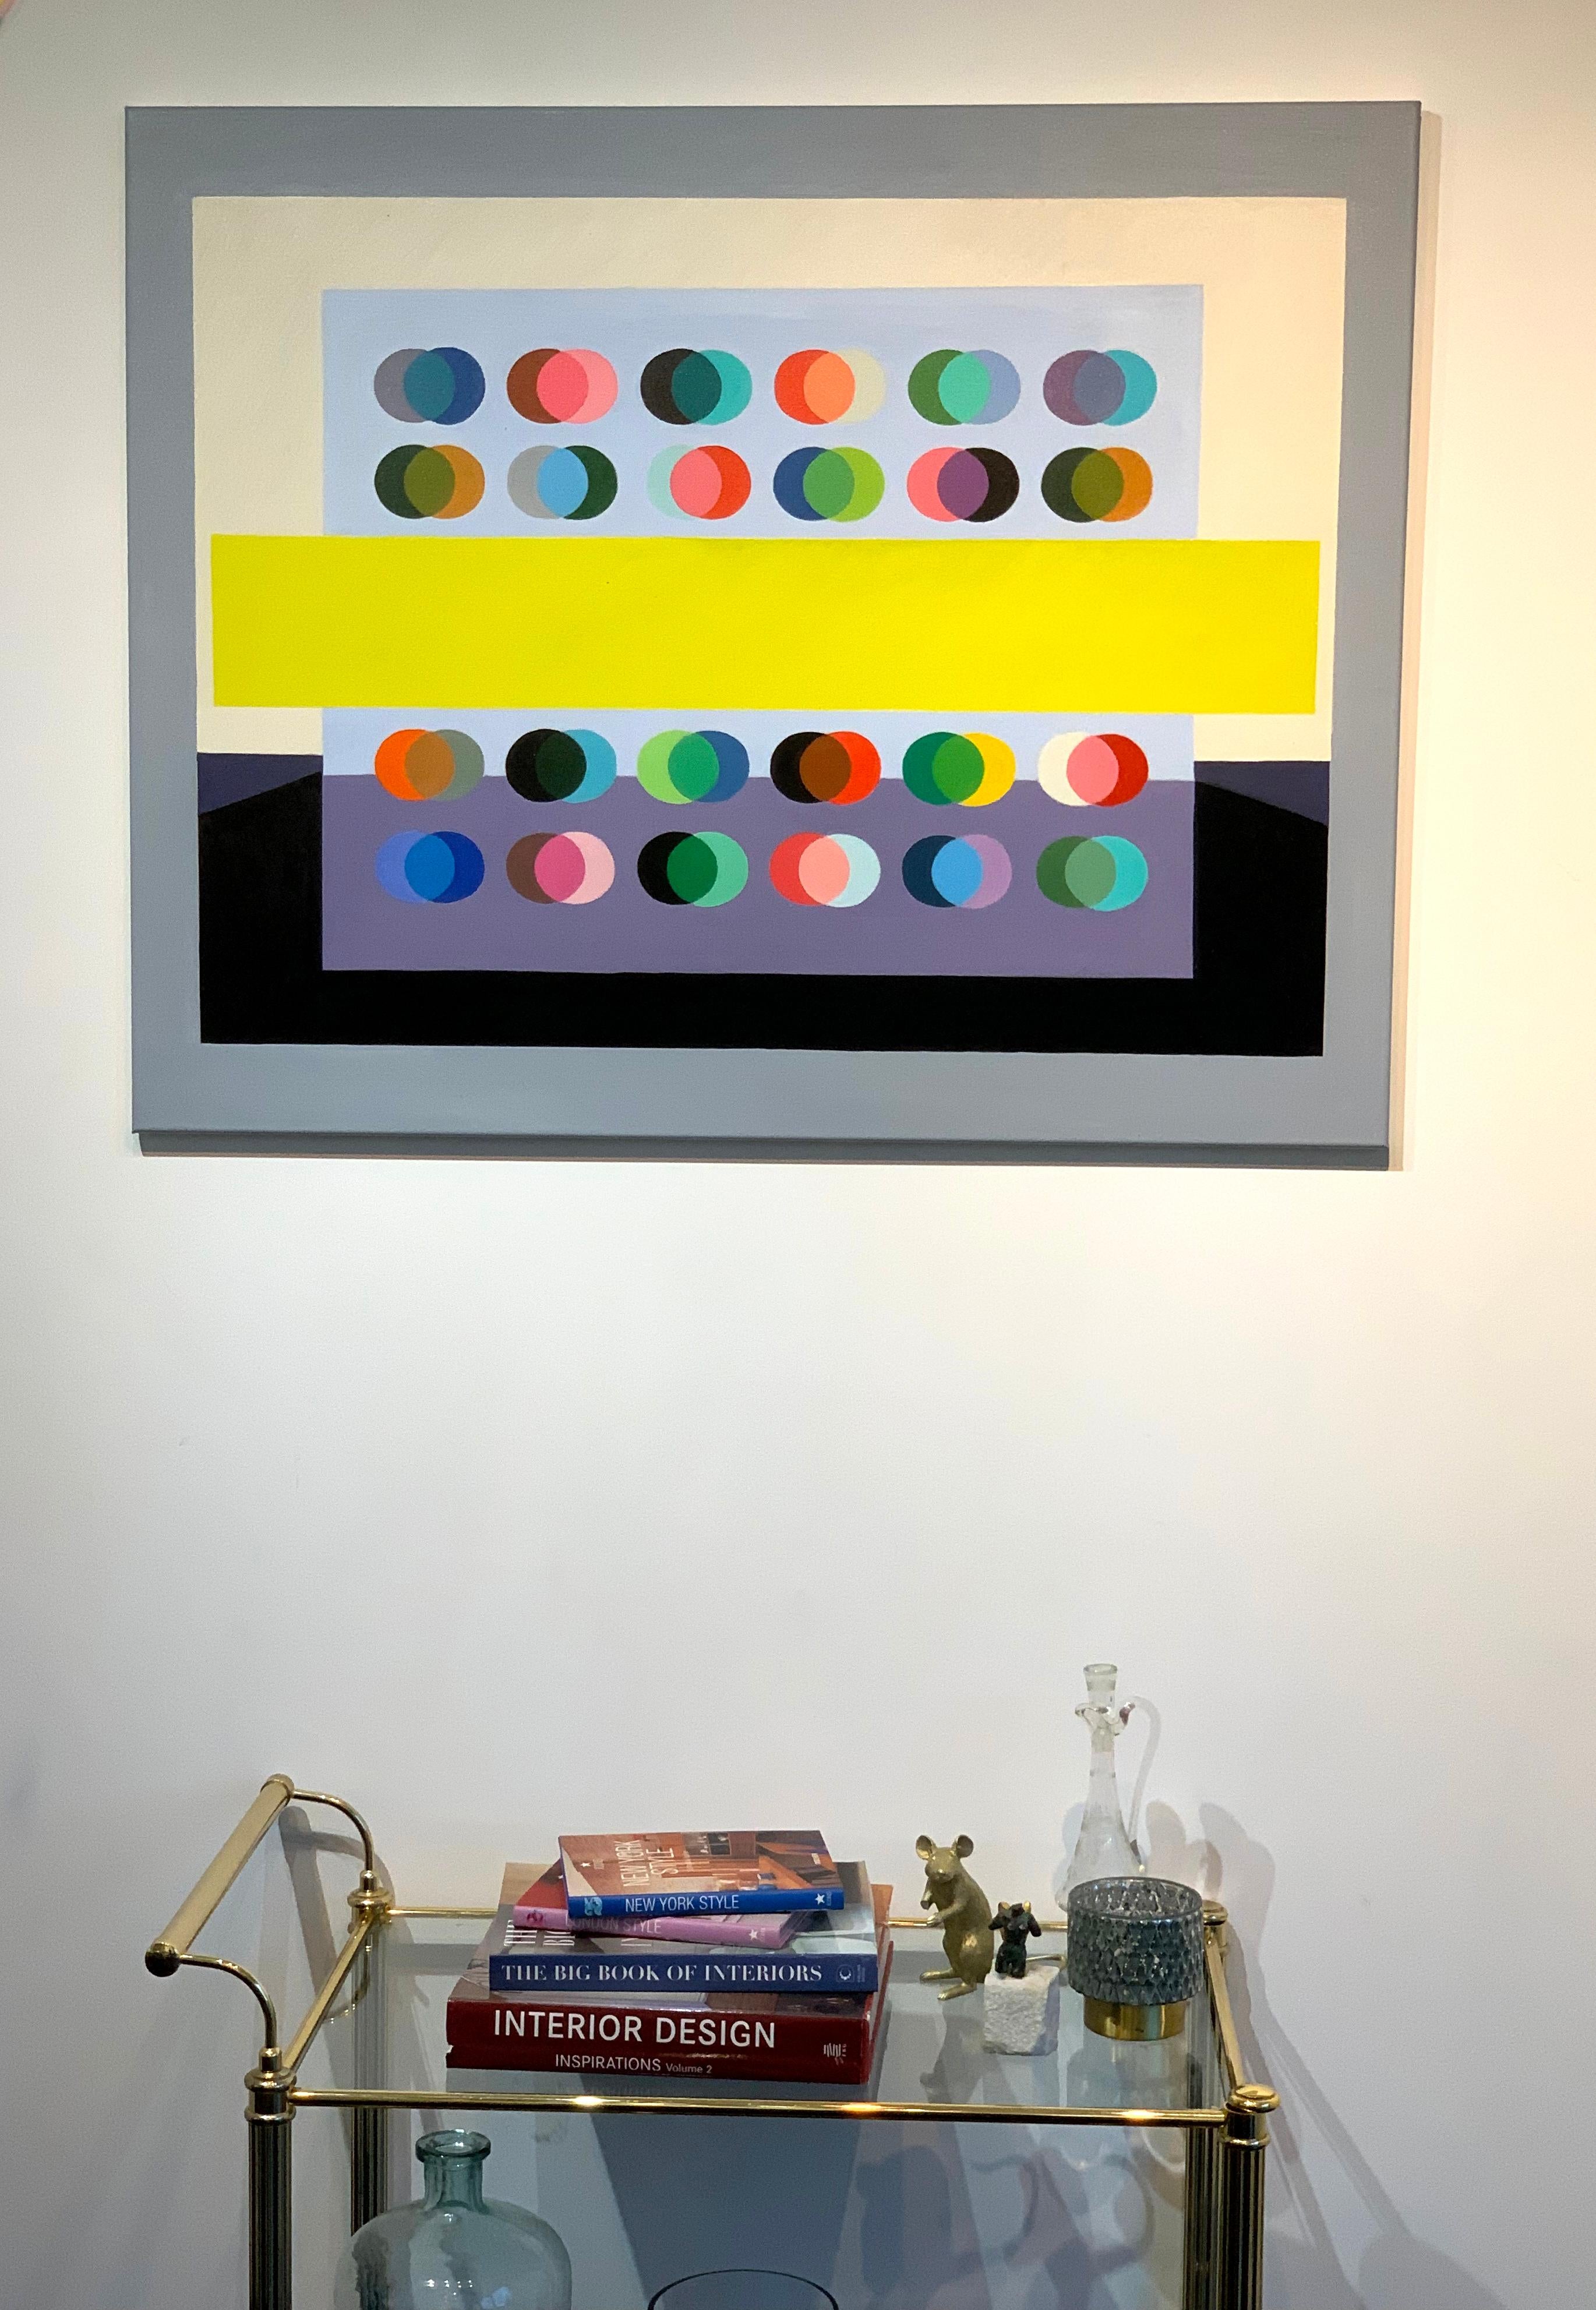 Dream Big is an original oil painting, where colorful circles are inter-lapping on top of a grey color plane, surrounded by a black and grey landscape plain. The middle is a bright neon yellow square. Turning this into a very contemporary